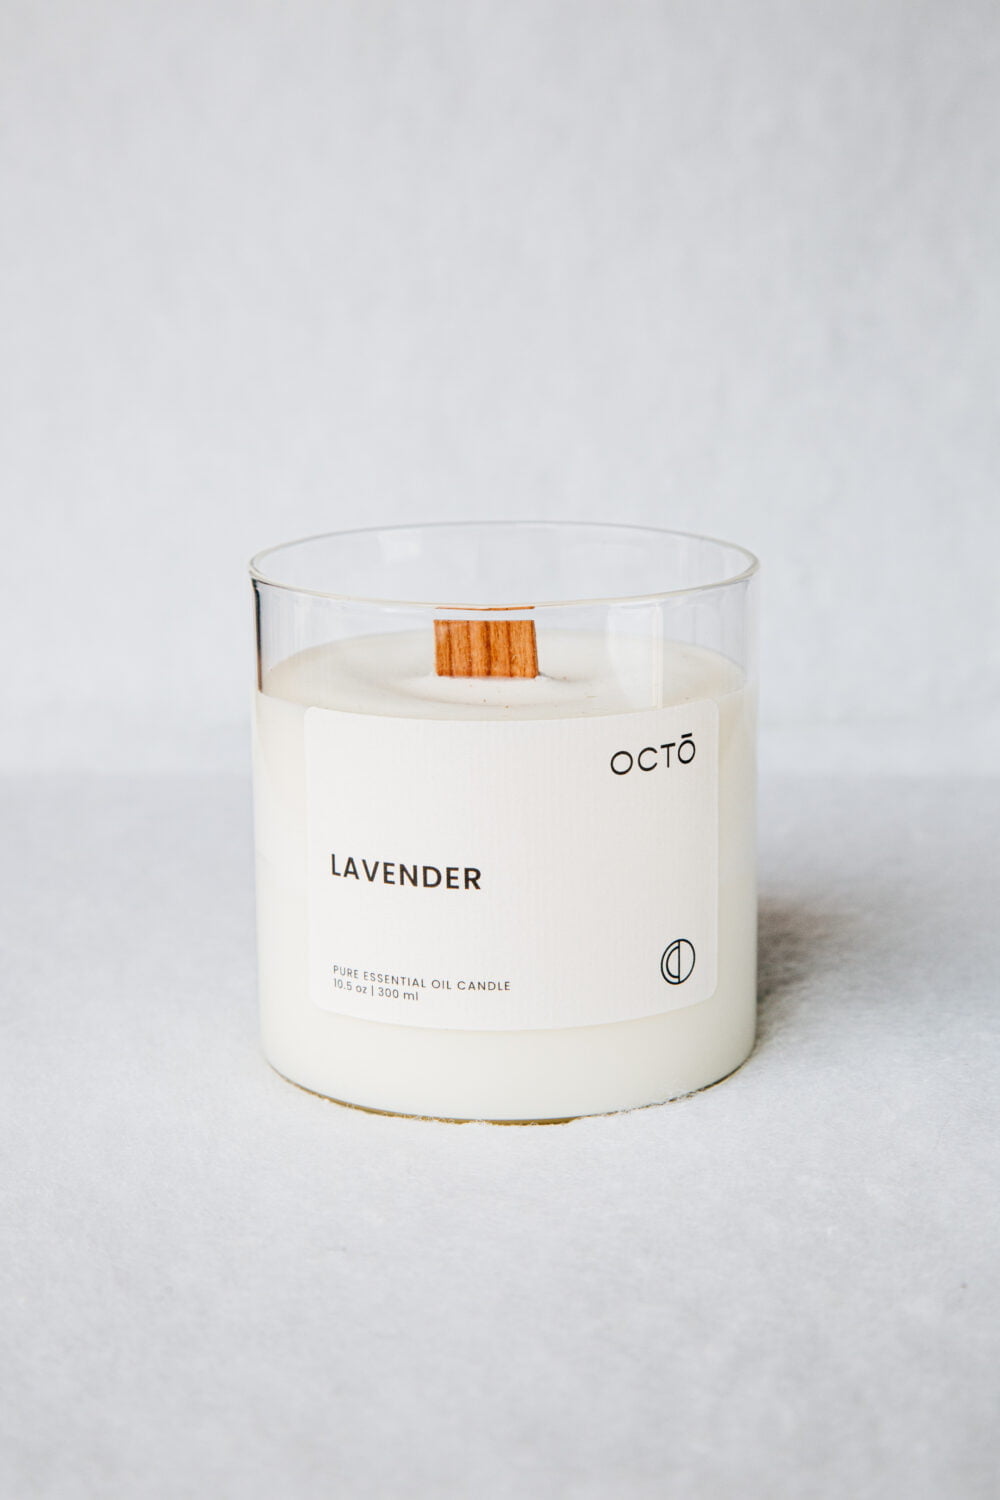 octo lavender wood wick